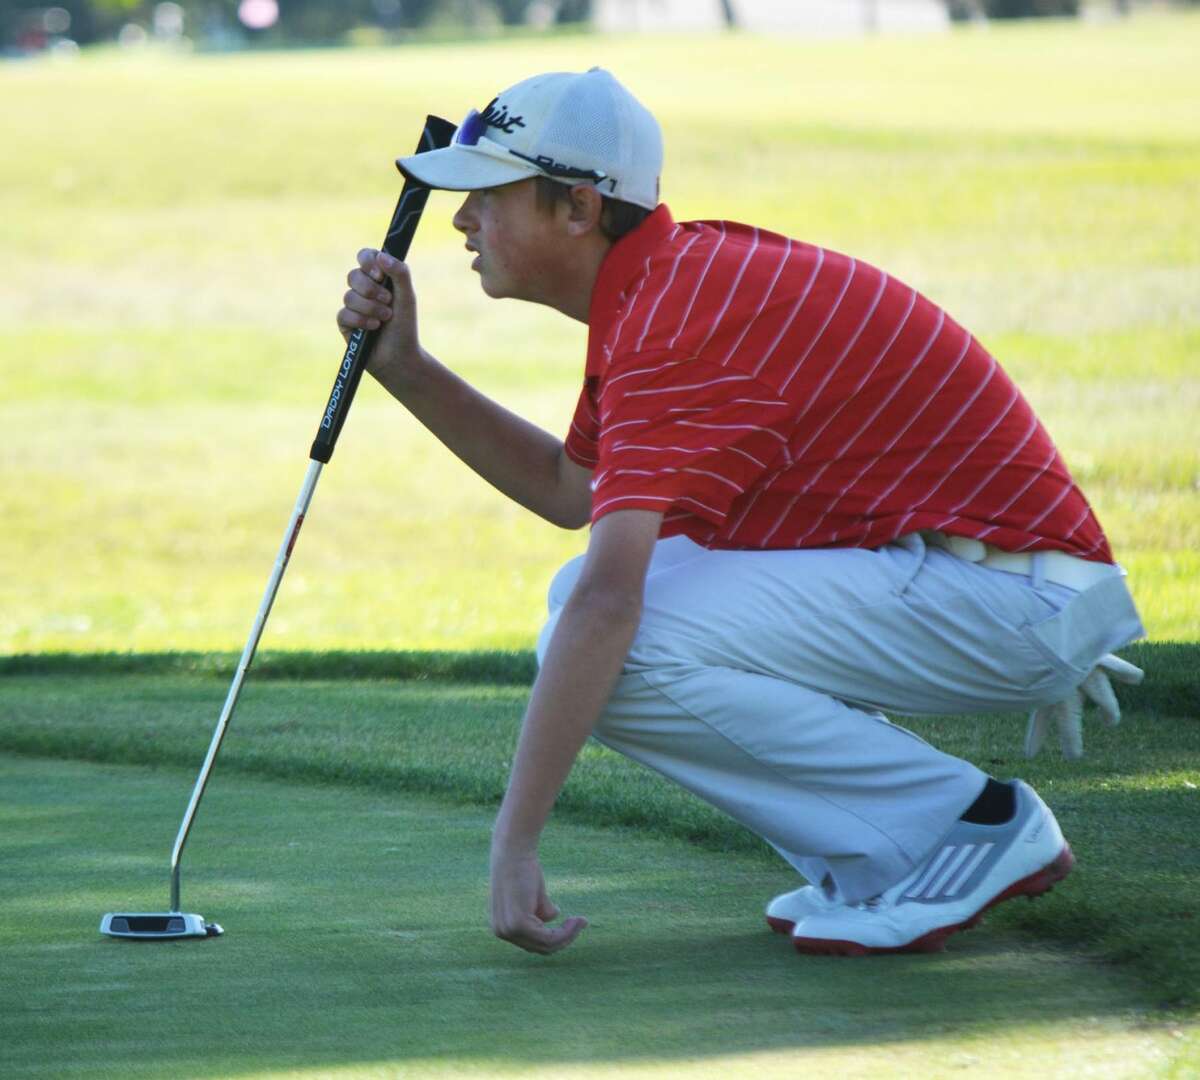 Plainview golfer Zach McDonough lines up a putt during the Plainview Triangular at the Plainview Country Club Saturday. McDonough led the Bulldogs' 'B' team with a 91.